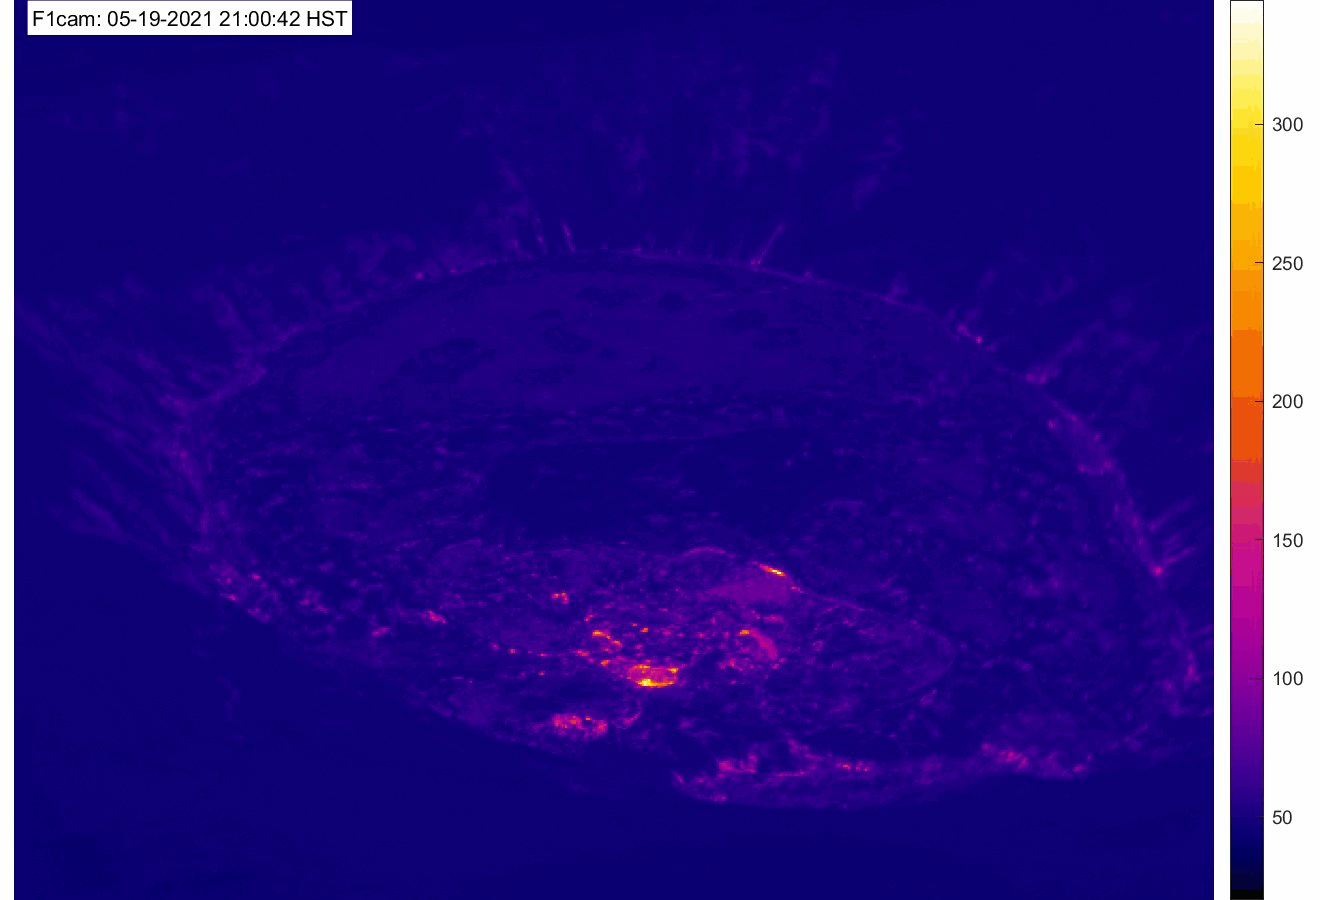 Thermal image loop from the USGS-HVO F1 camera on May 20, 2021, the 5-month milestone since the start of the eruption.